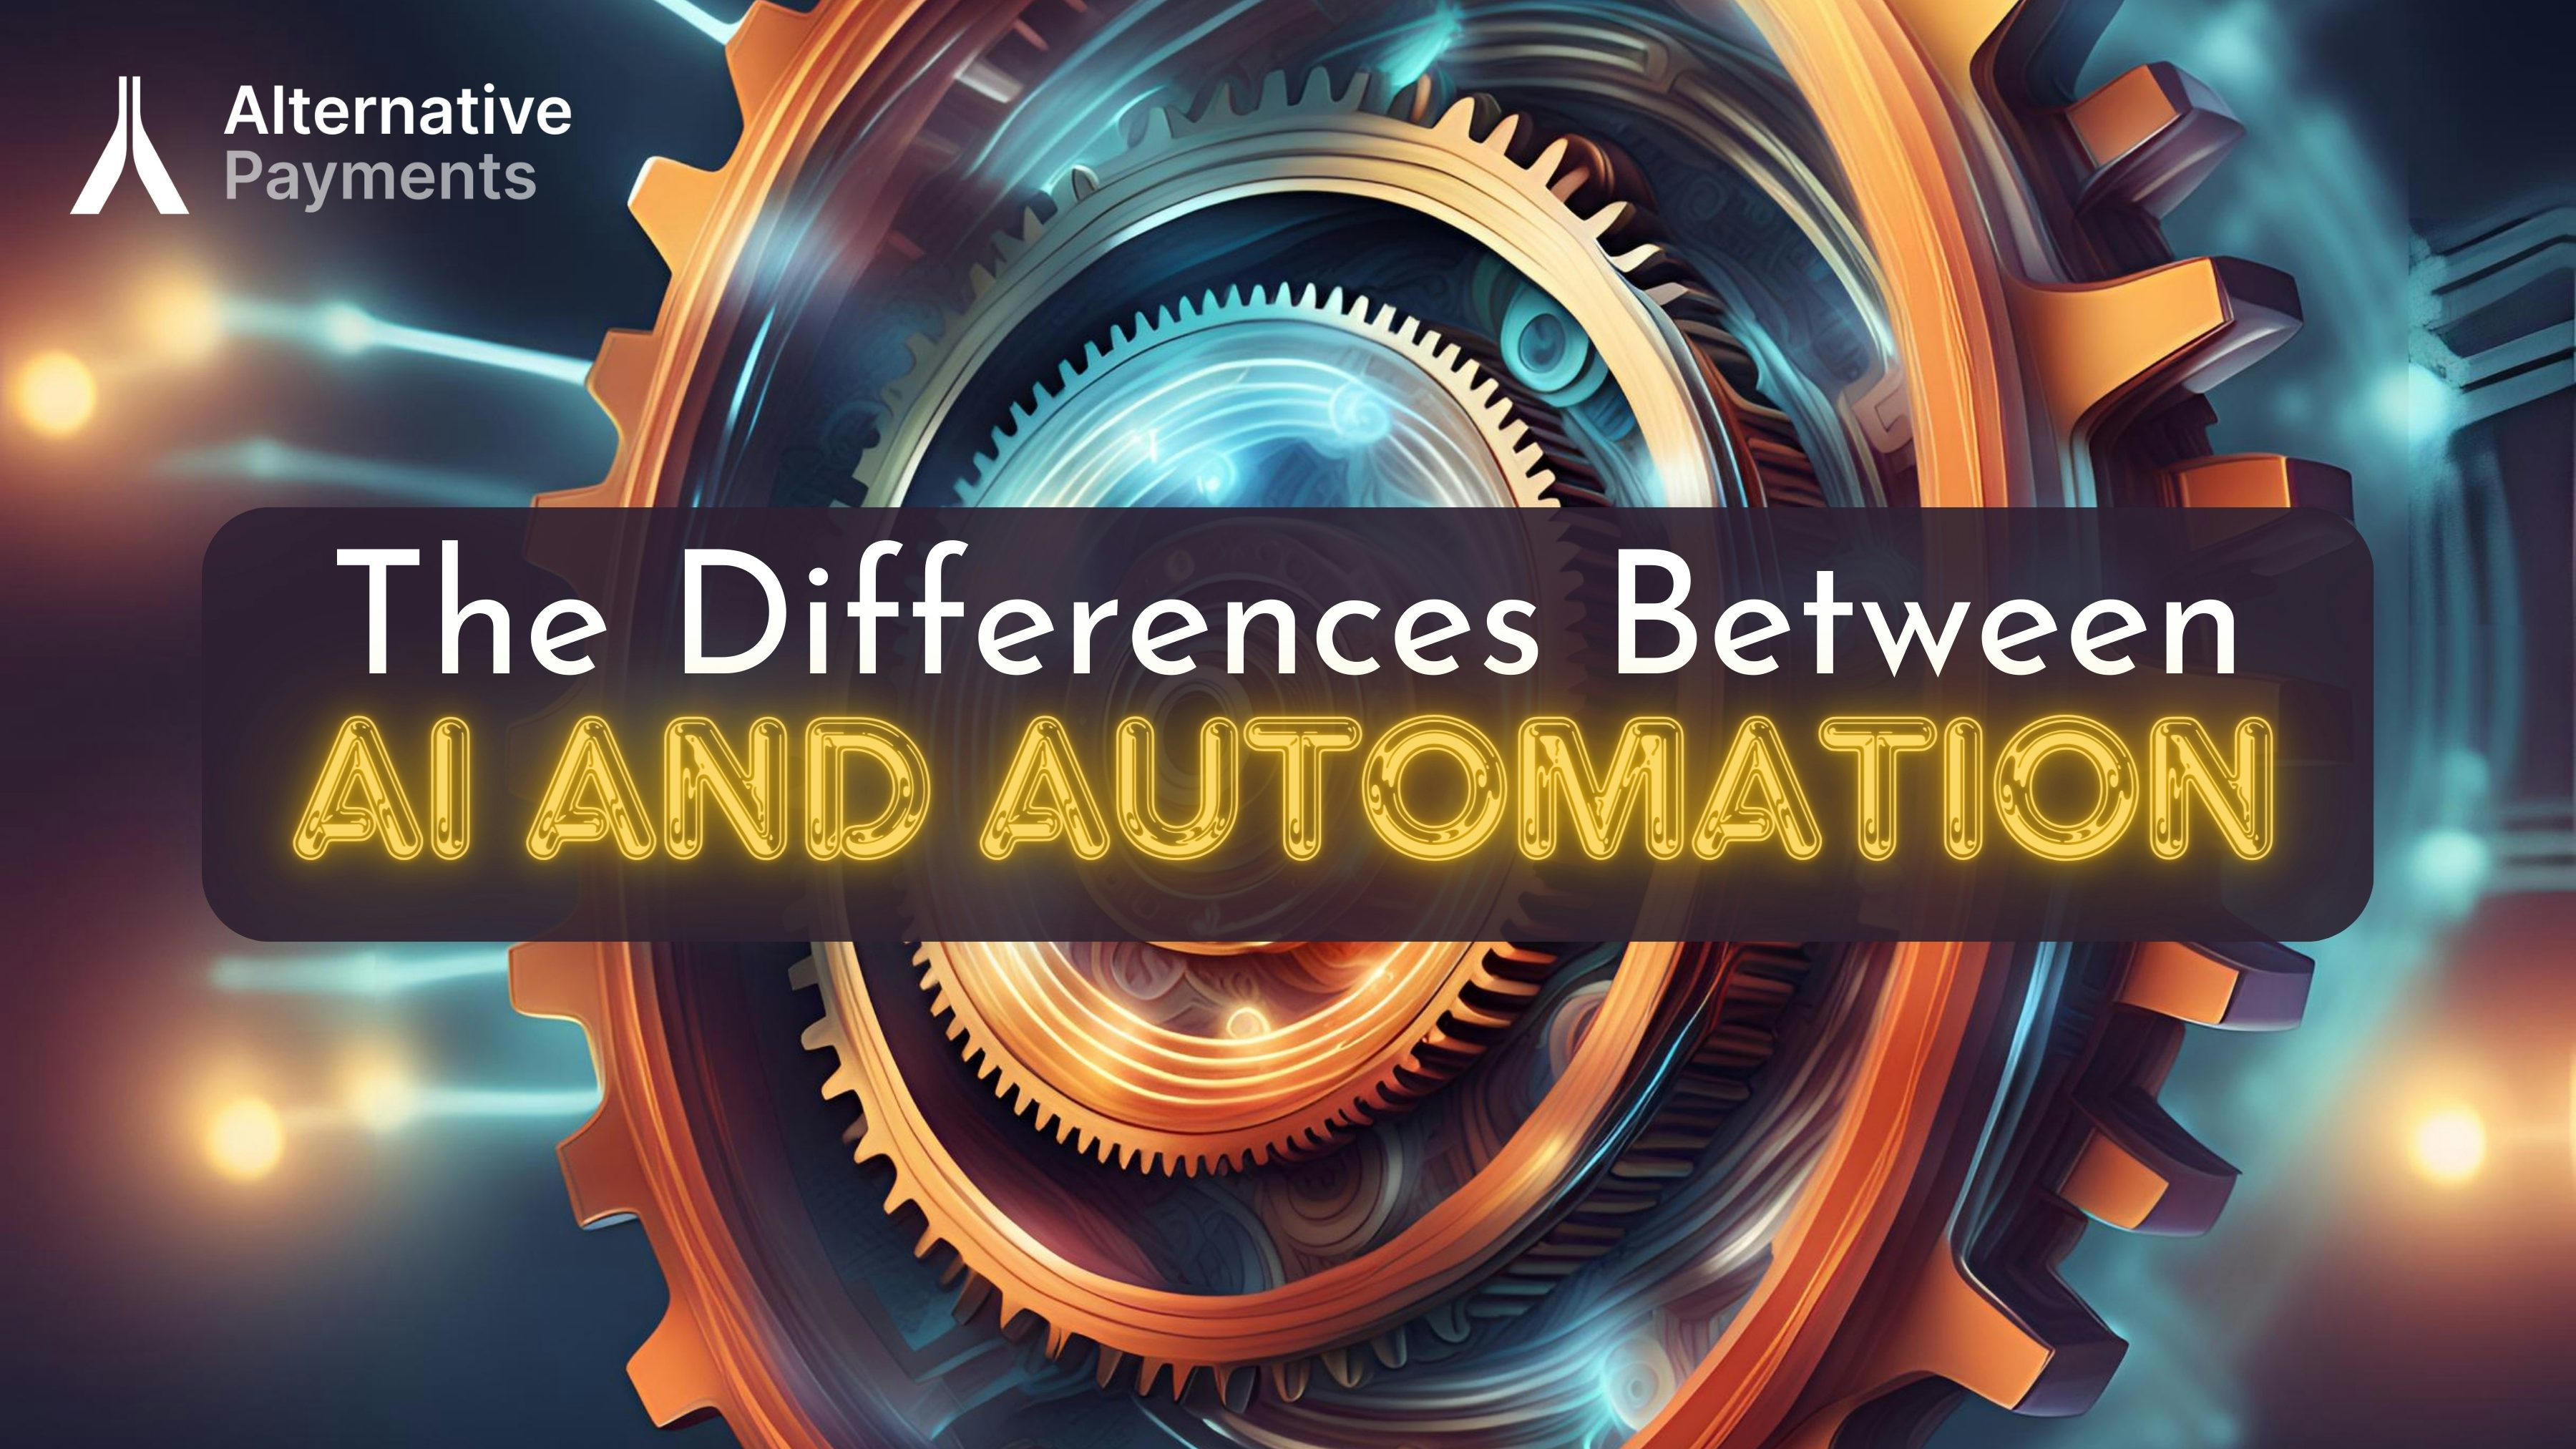 A dynamic image showcasing interconnected gears symbolizing automation overlaid with AI algorithms representing intelligent decision-making. The center of the image features the first part of the title “The Differences Between” in white lettering and the second part, “AI and Automation” in bold balloon-like soft edge neon gold glowing lettering, which are both overlaid on top of a circular rectangle dark background. The Alternative Payments logo, in white and grey lettering, is in the top left corner.